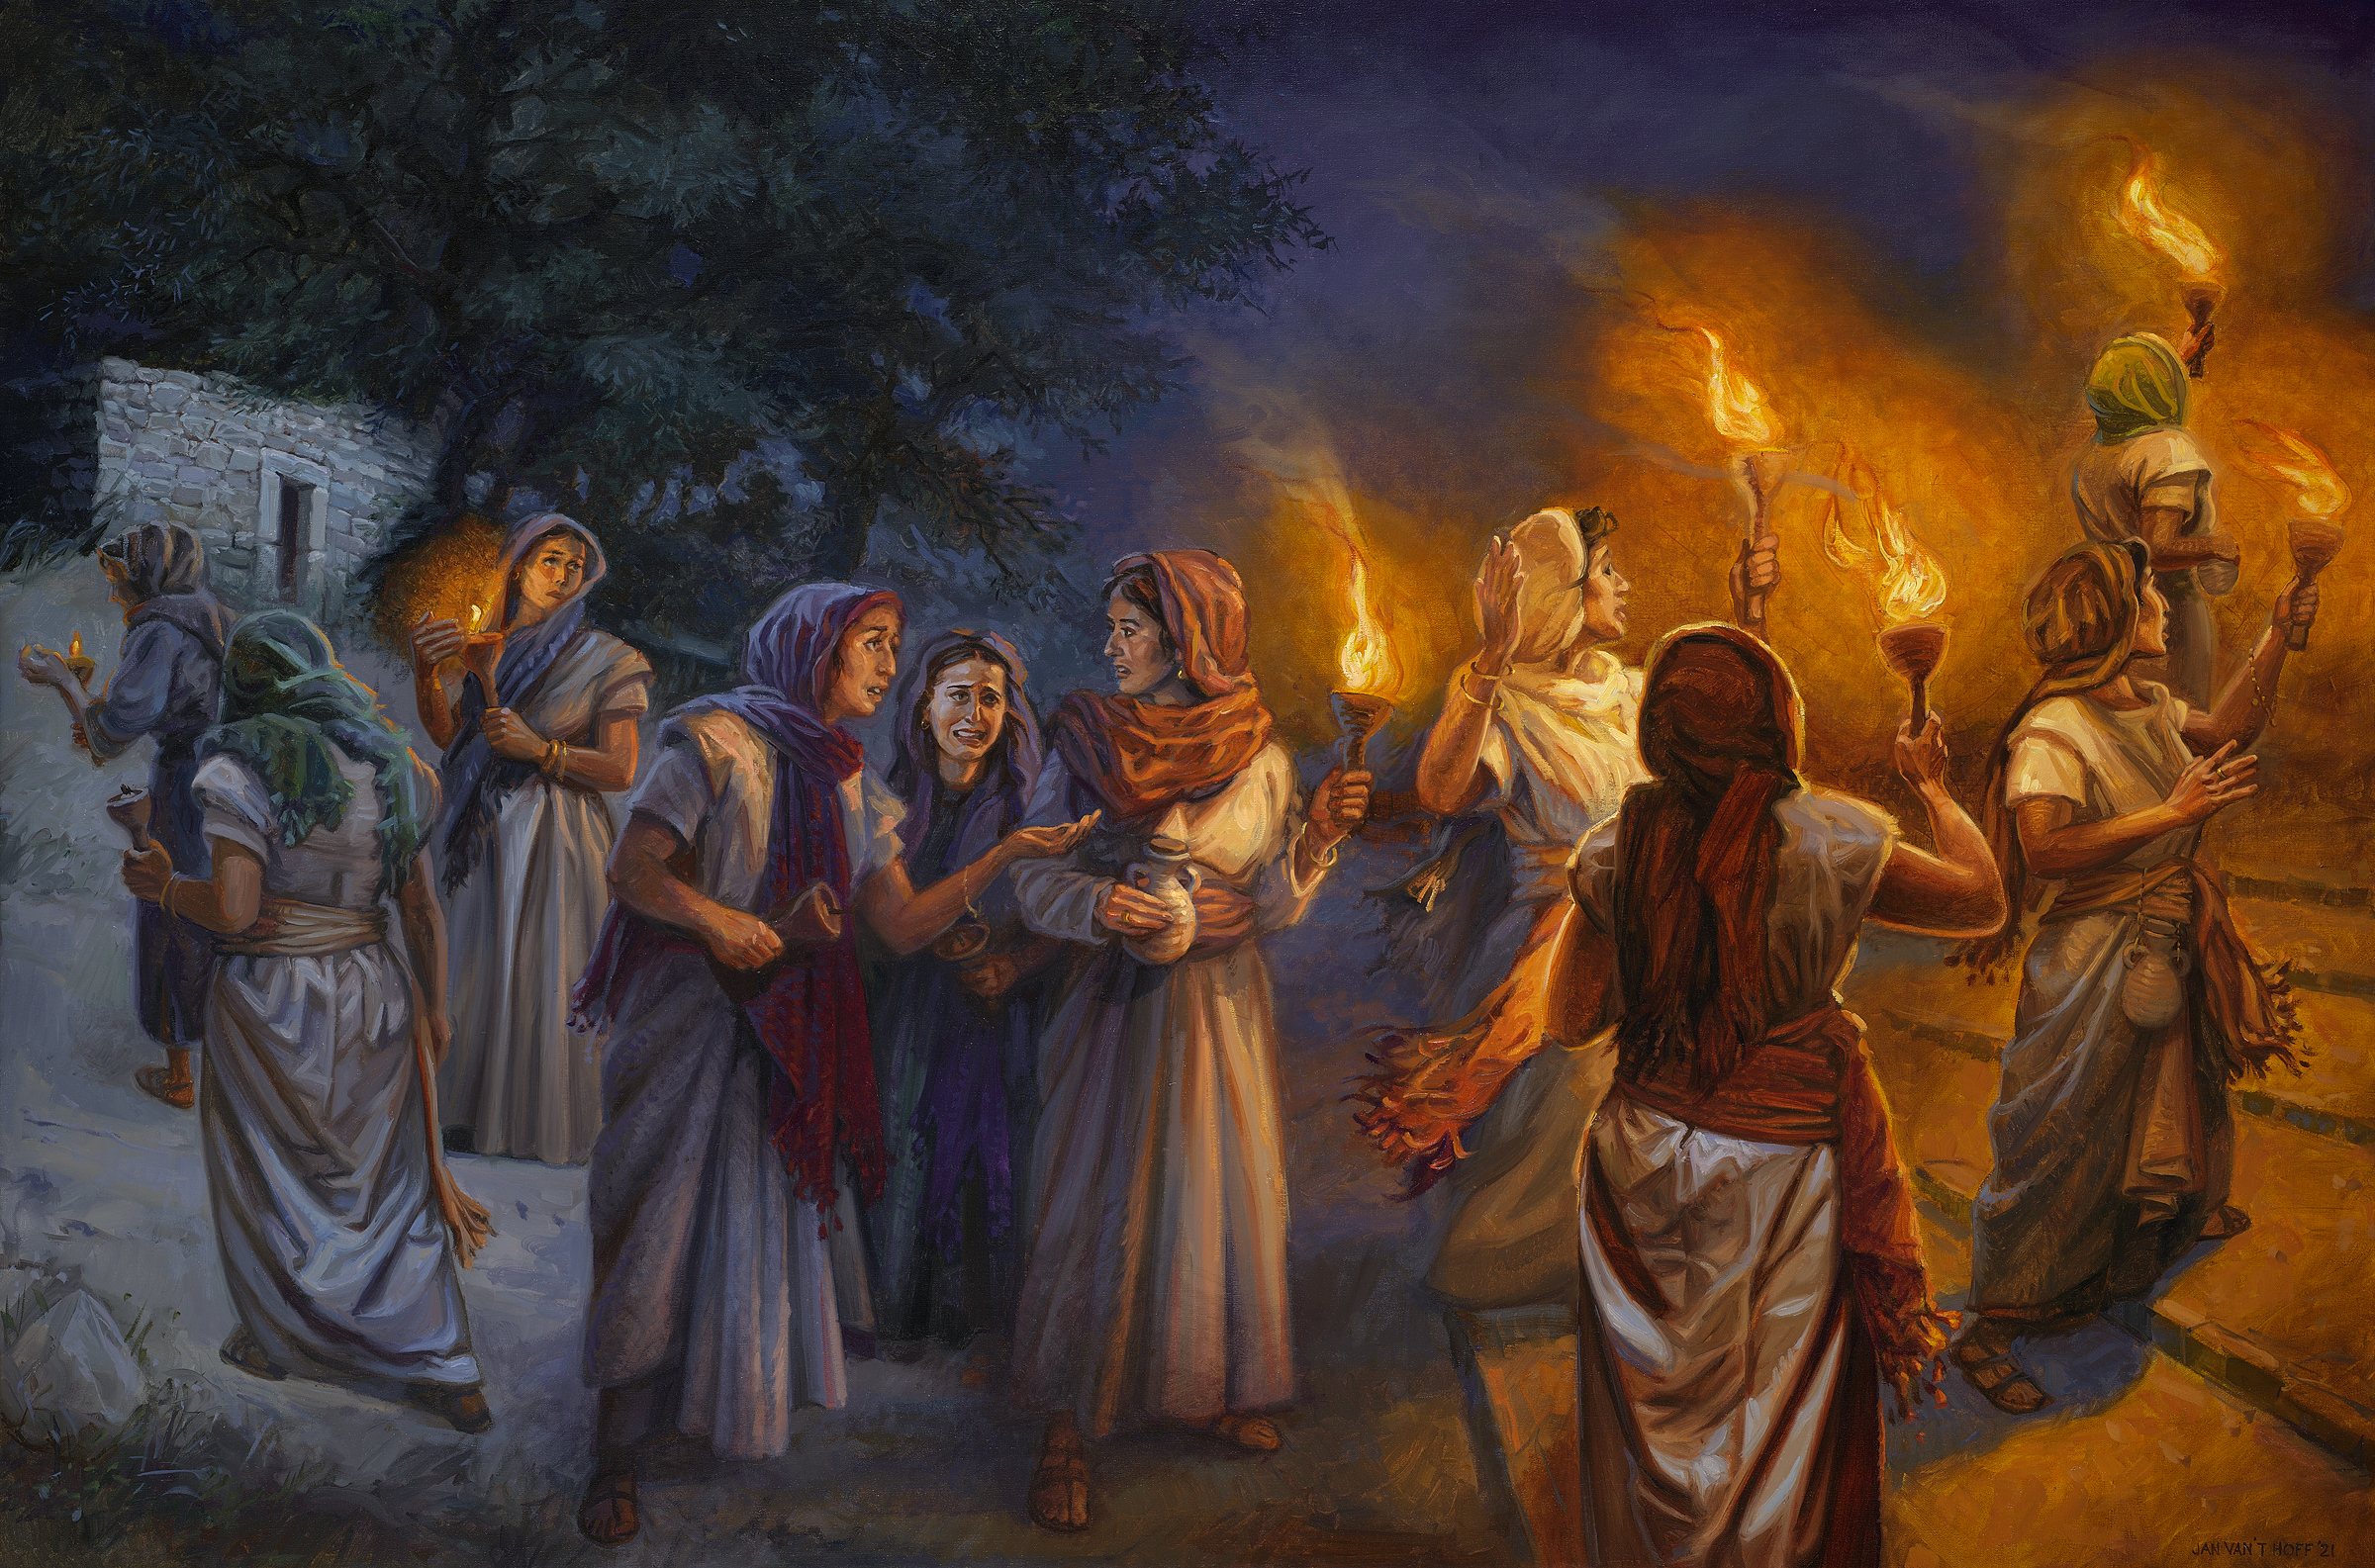 https://www.gospelimages.com/paintings/92/the-parable-of-the-ten-virgins?